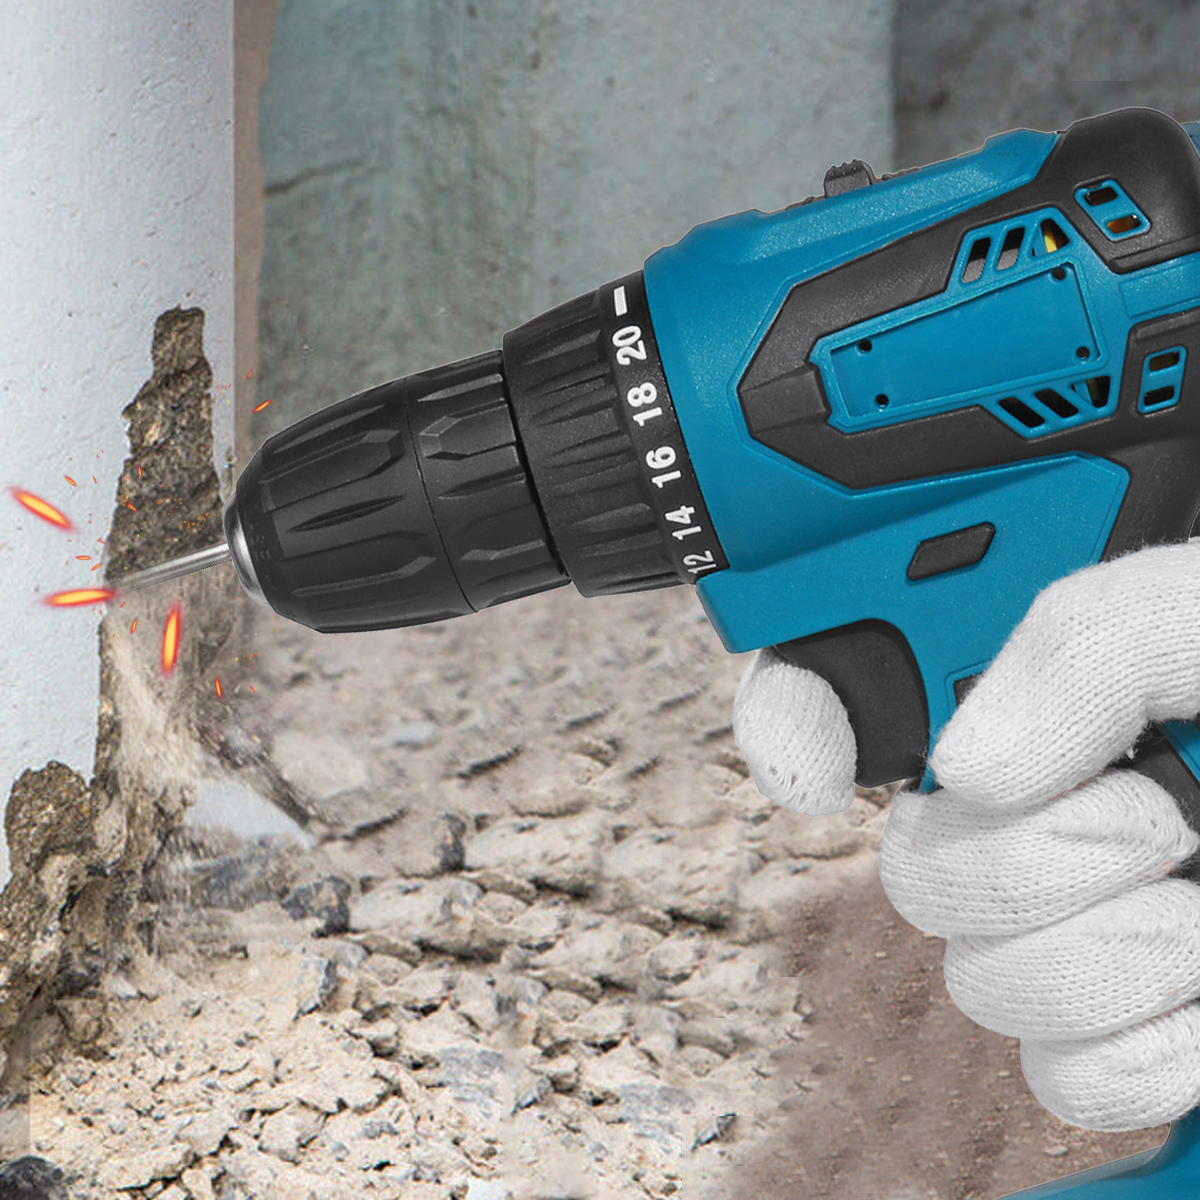 10mm-Rechargable-Electric-Drill-Screwdriver-1350RPM-2-Speed-Impact-Hand-Drill-Fit-Makita-Battery-1882944-6